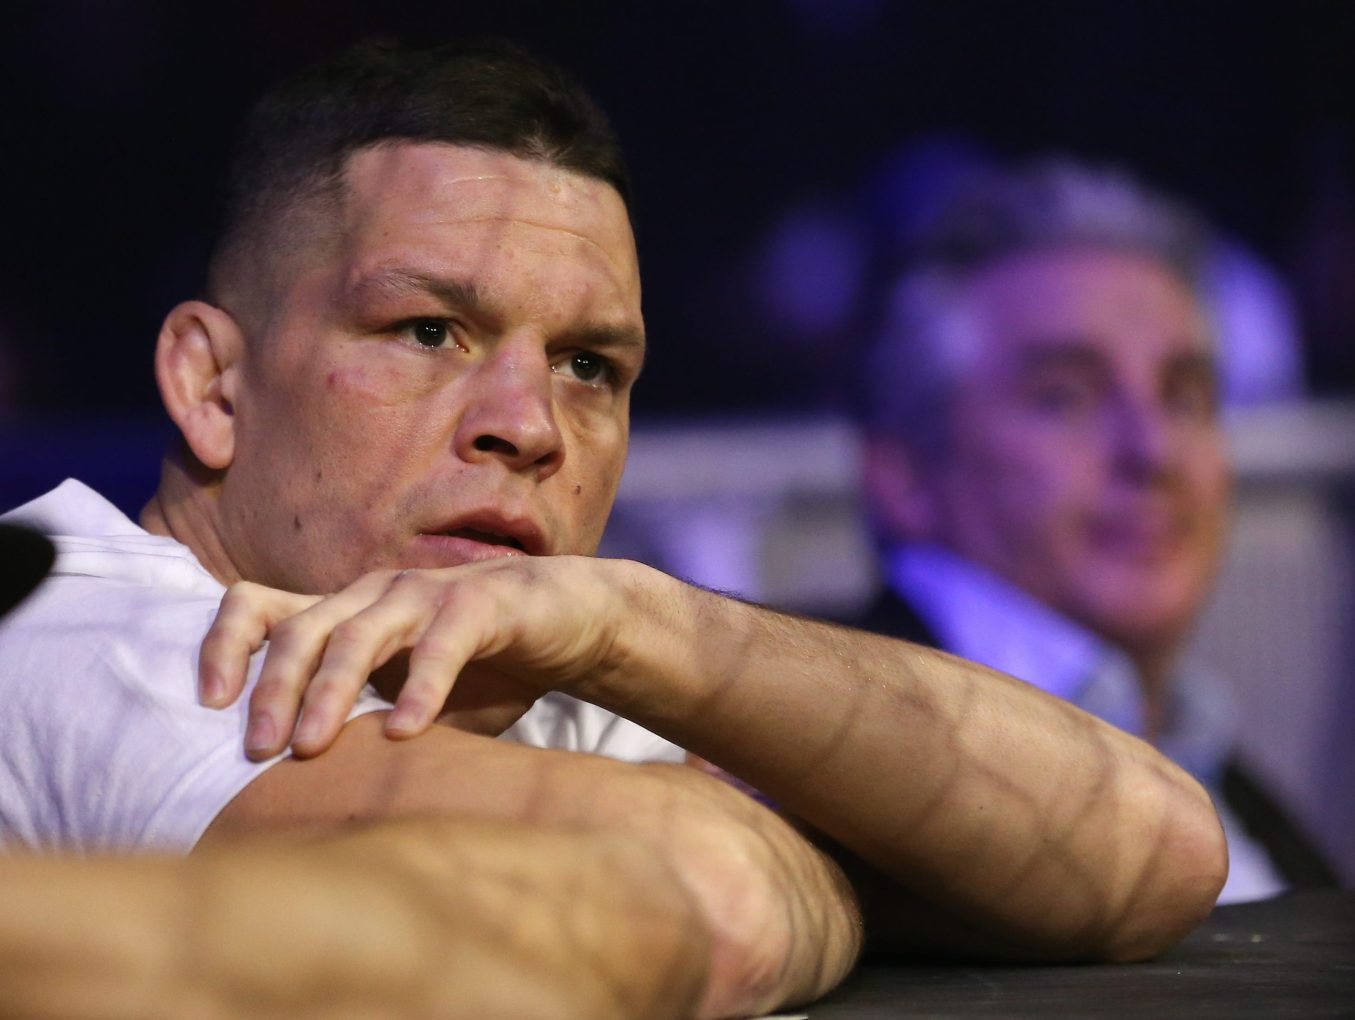 Boxing isn't a place for saints. But bringing Nate Diaz to the ring a black eye for sport